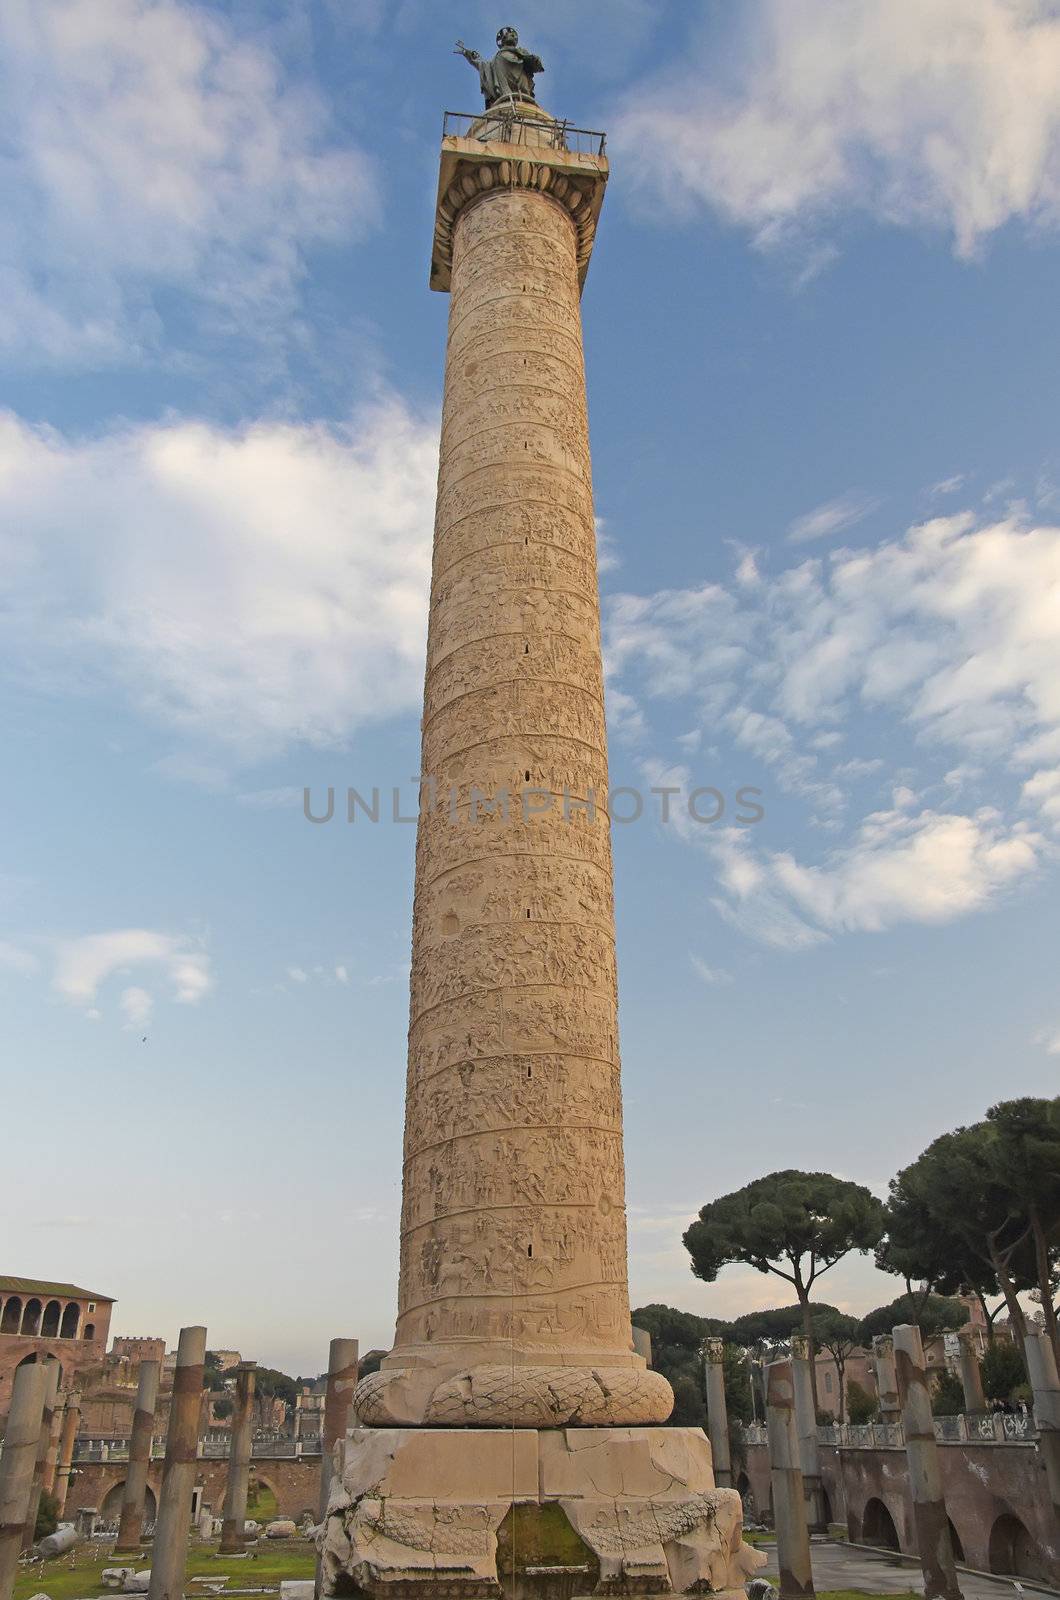 The historical column of Traian, in Rome